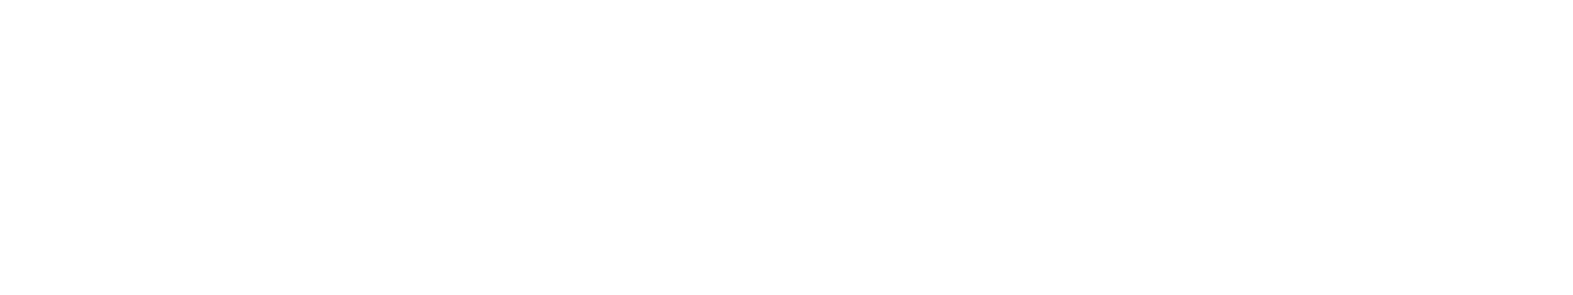 Americas Gold and Silver Corp logo grand pour les fonds sombres (PNG transparent)